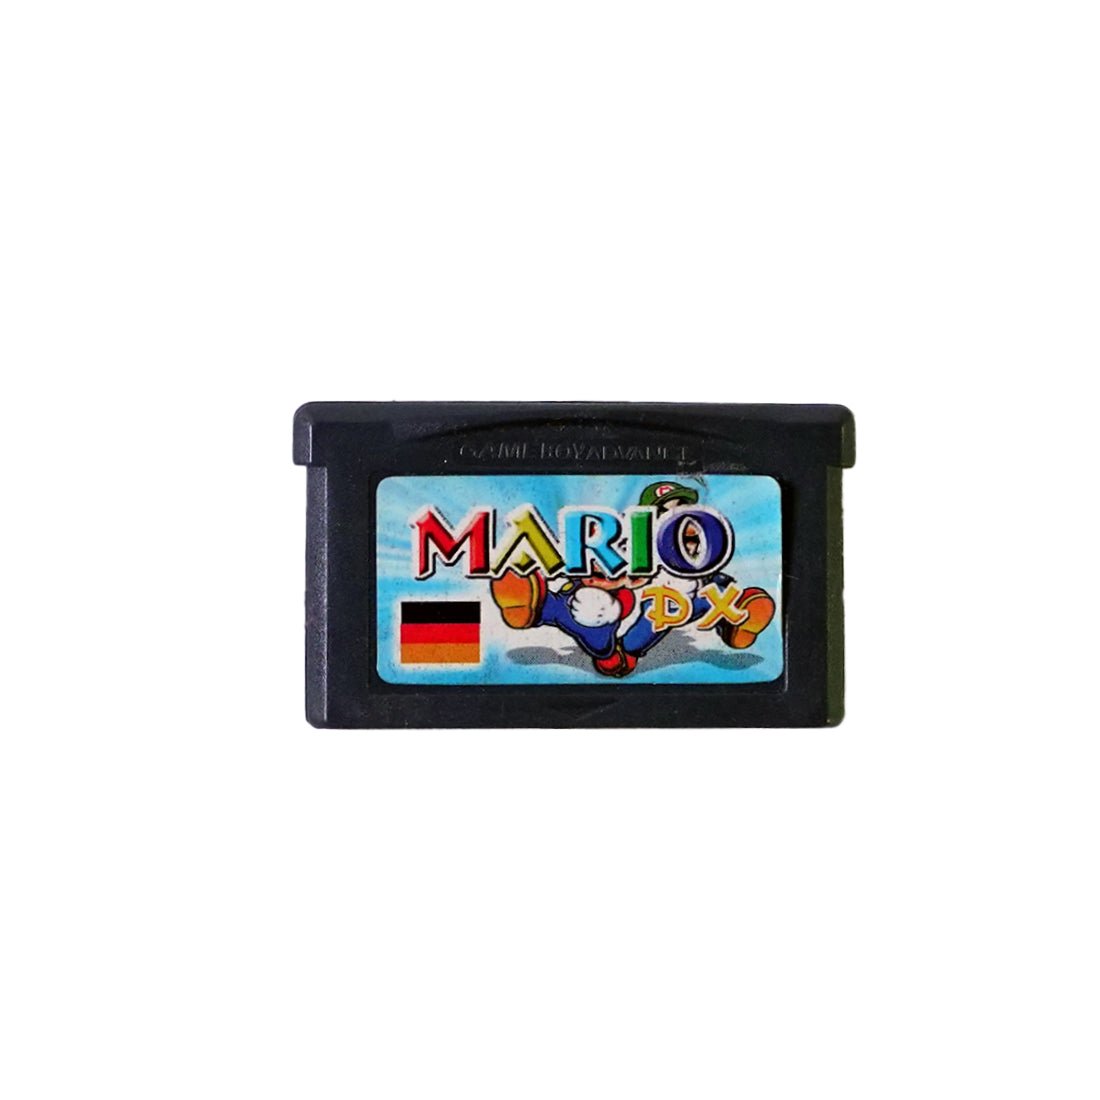 (Pre-Owned) Mario DX Game - Gameboy Advance - ريترو - Store 974 | ستور ٩٧٤